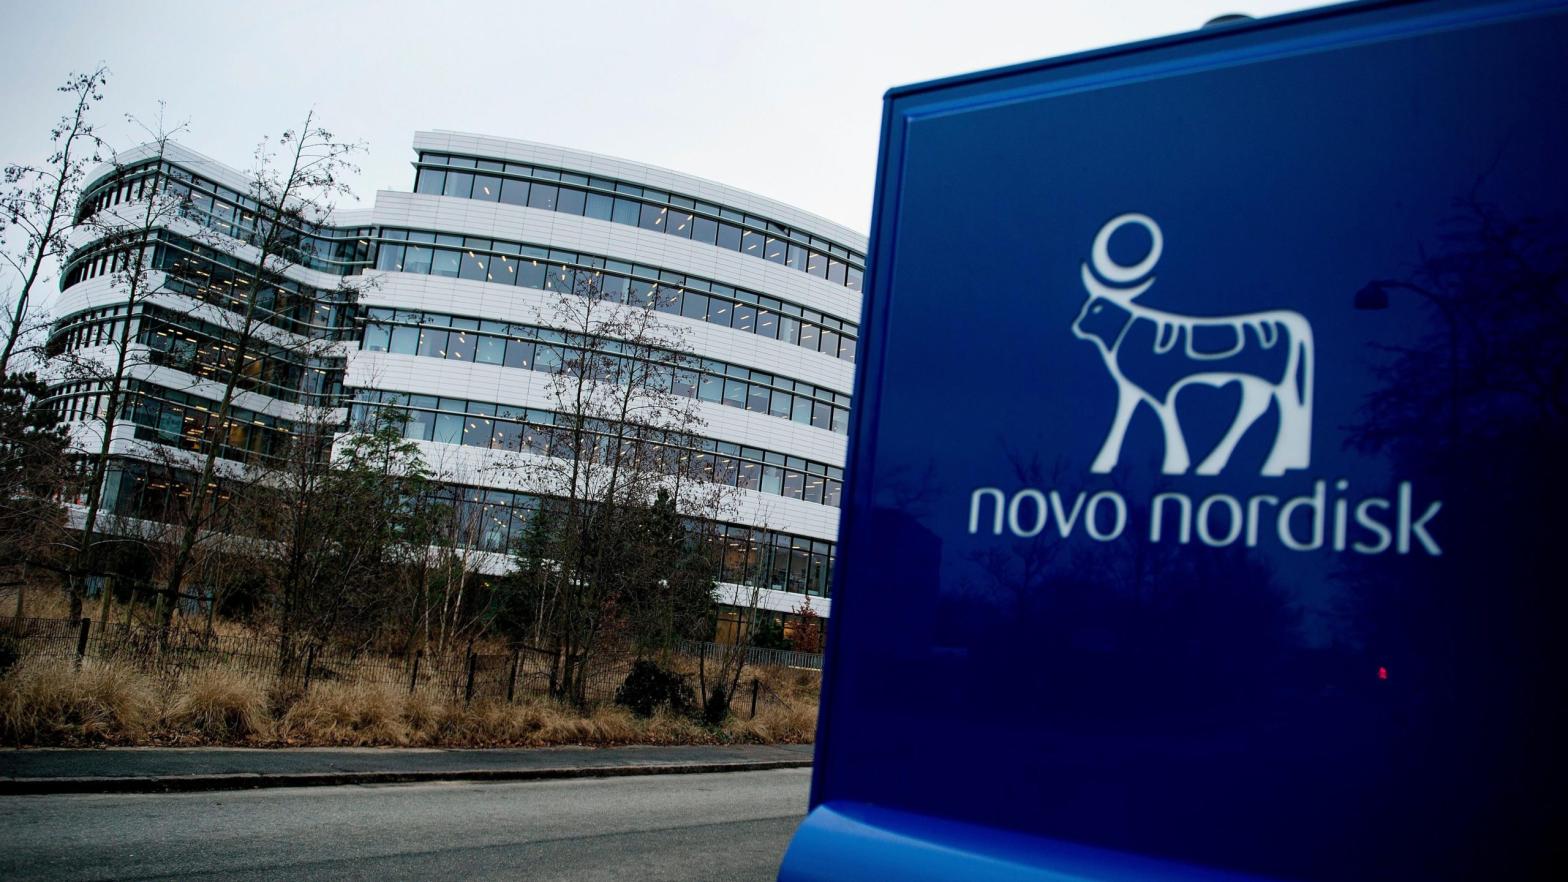 The logo of Danish pharmaceutical company Novo Nordisk is pictured at their headquarters in Bagsvaerd outside of Copenhagen, Denmark on February 1, 2017. (Photo: Liselotte Sabroe/Scanpix Denmark/AFP, Getty Images)